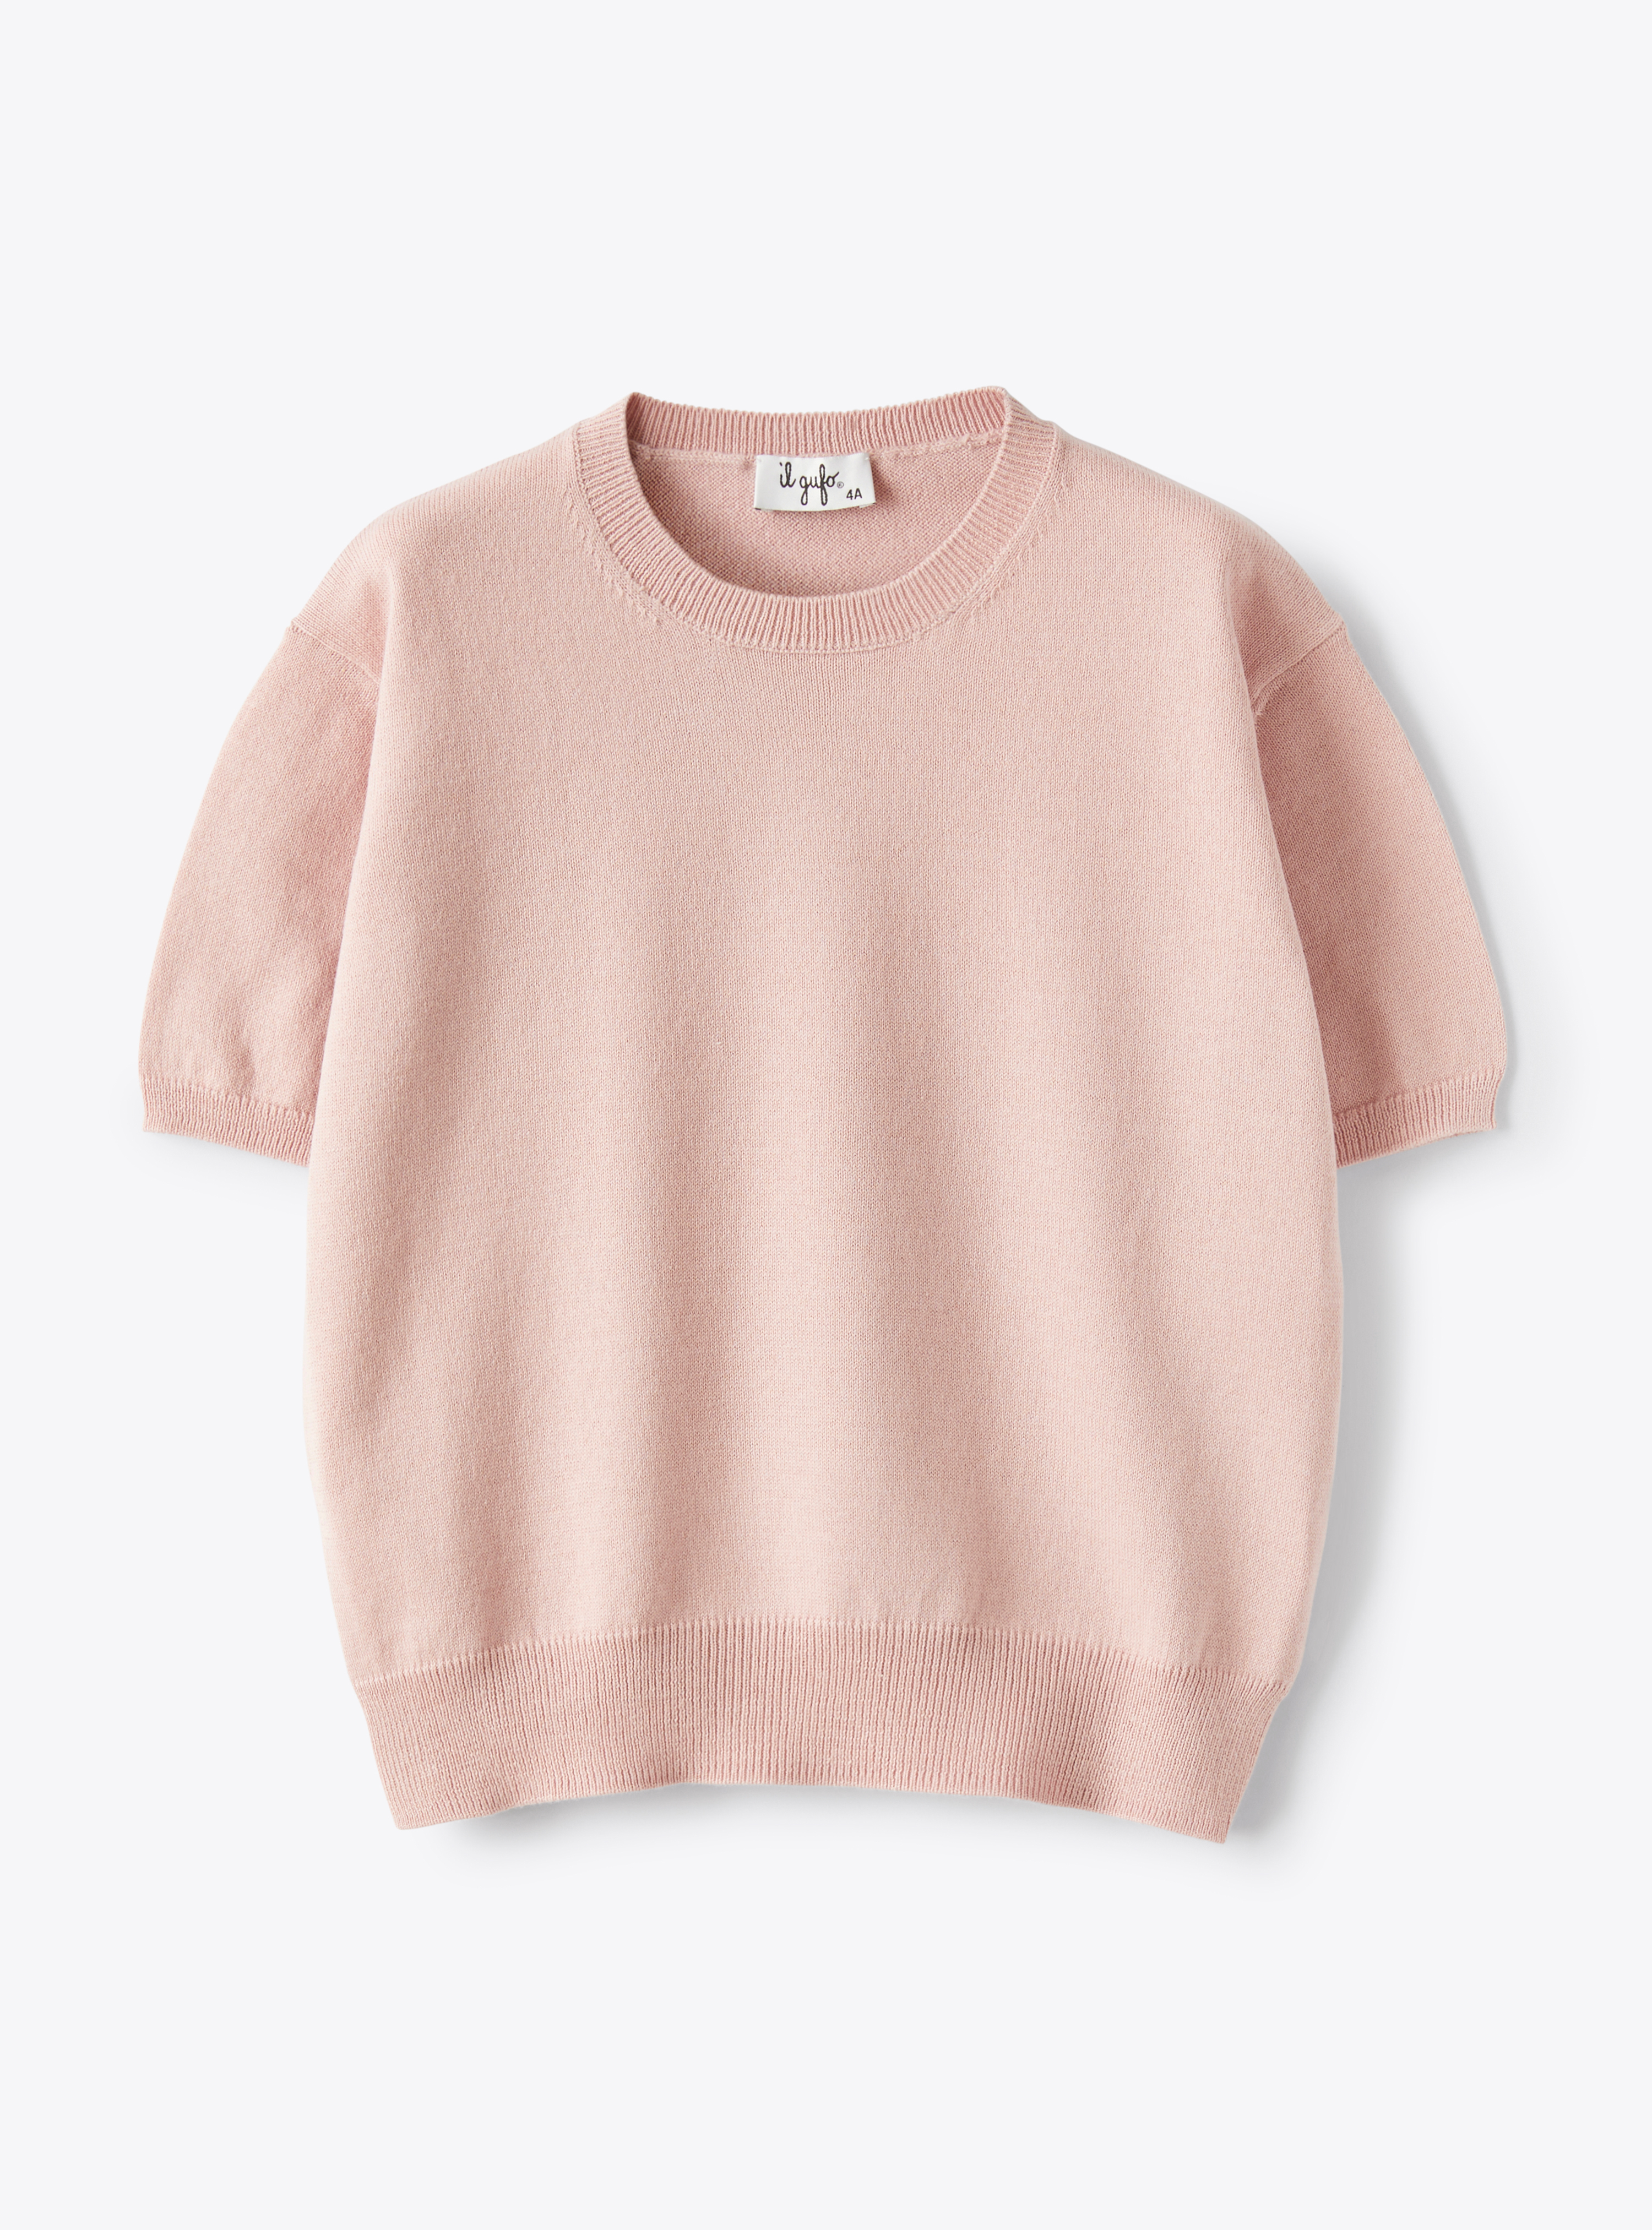 Short-sleeve unisex sweater in pepper-pink organic cotton - Pink | Il Gufo